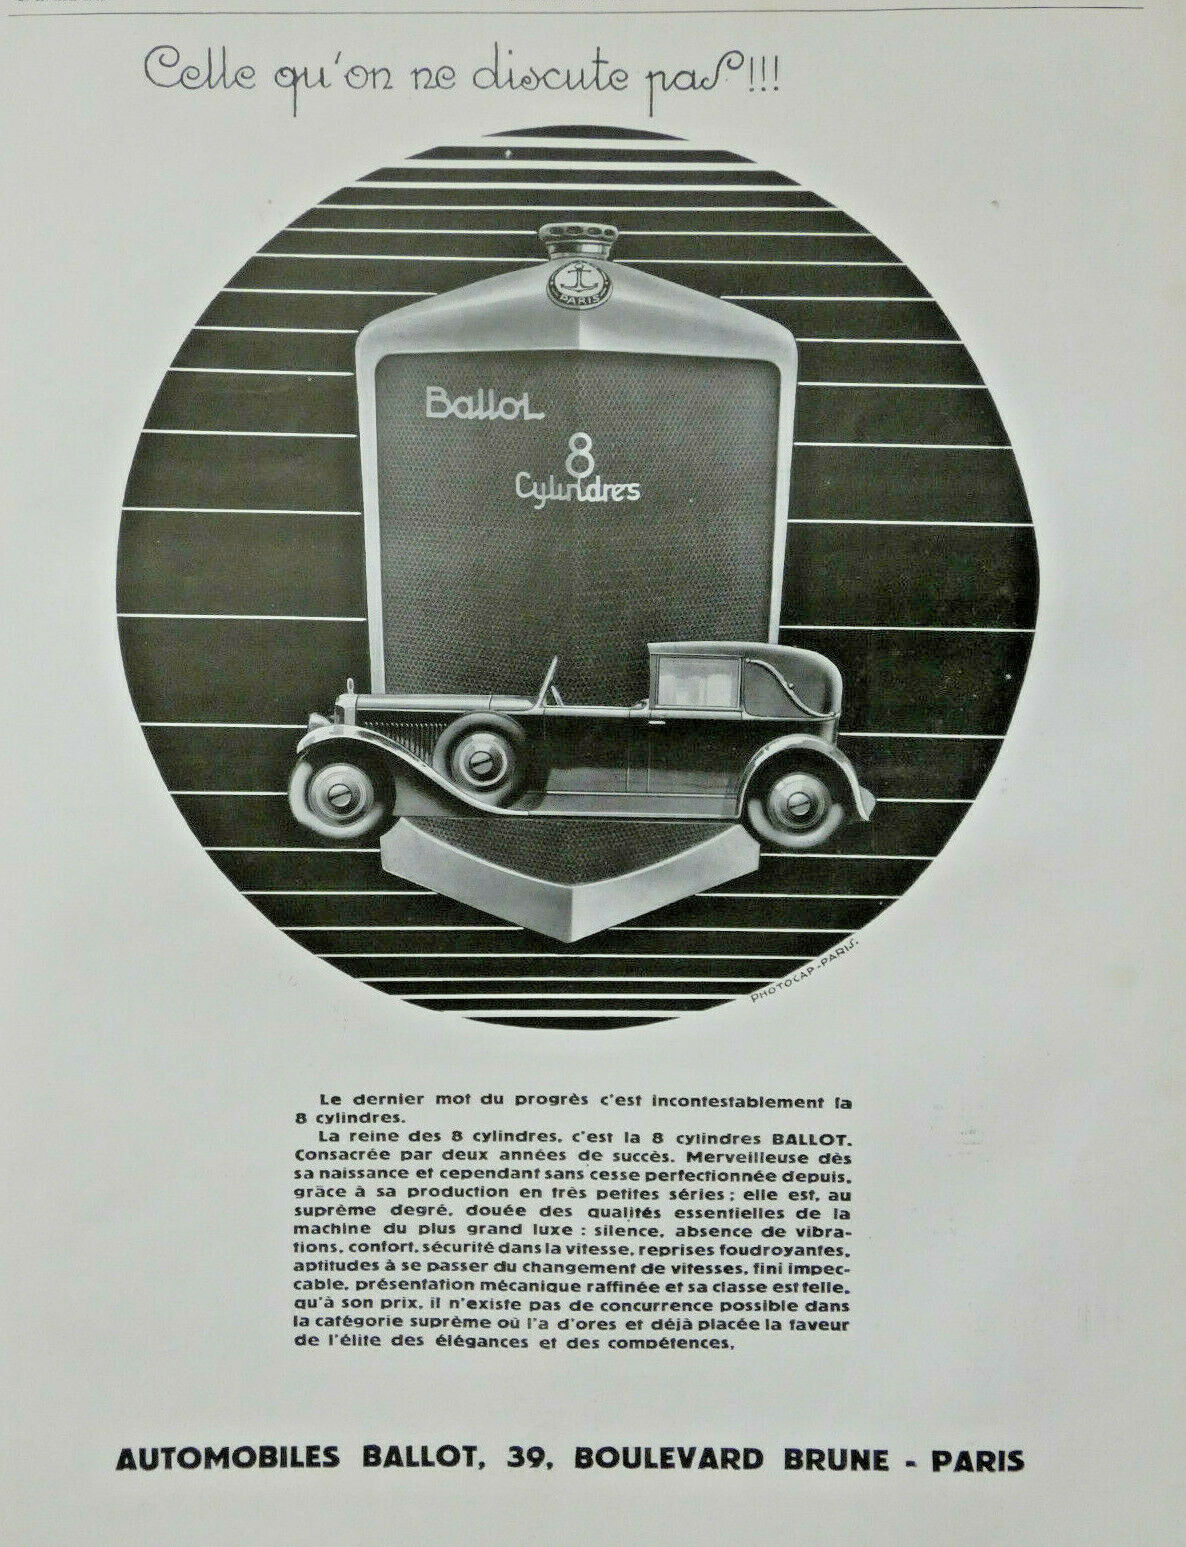 1929 AUTOMOBILES BALLOT PRESS ADVERTISEMENT THE ONE NOT DISCUSSED